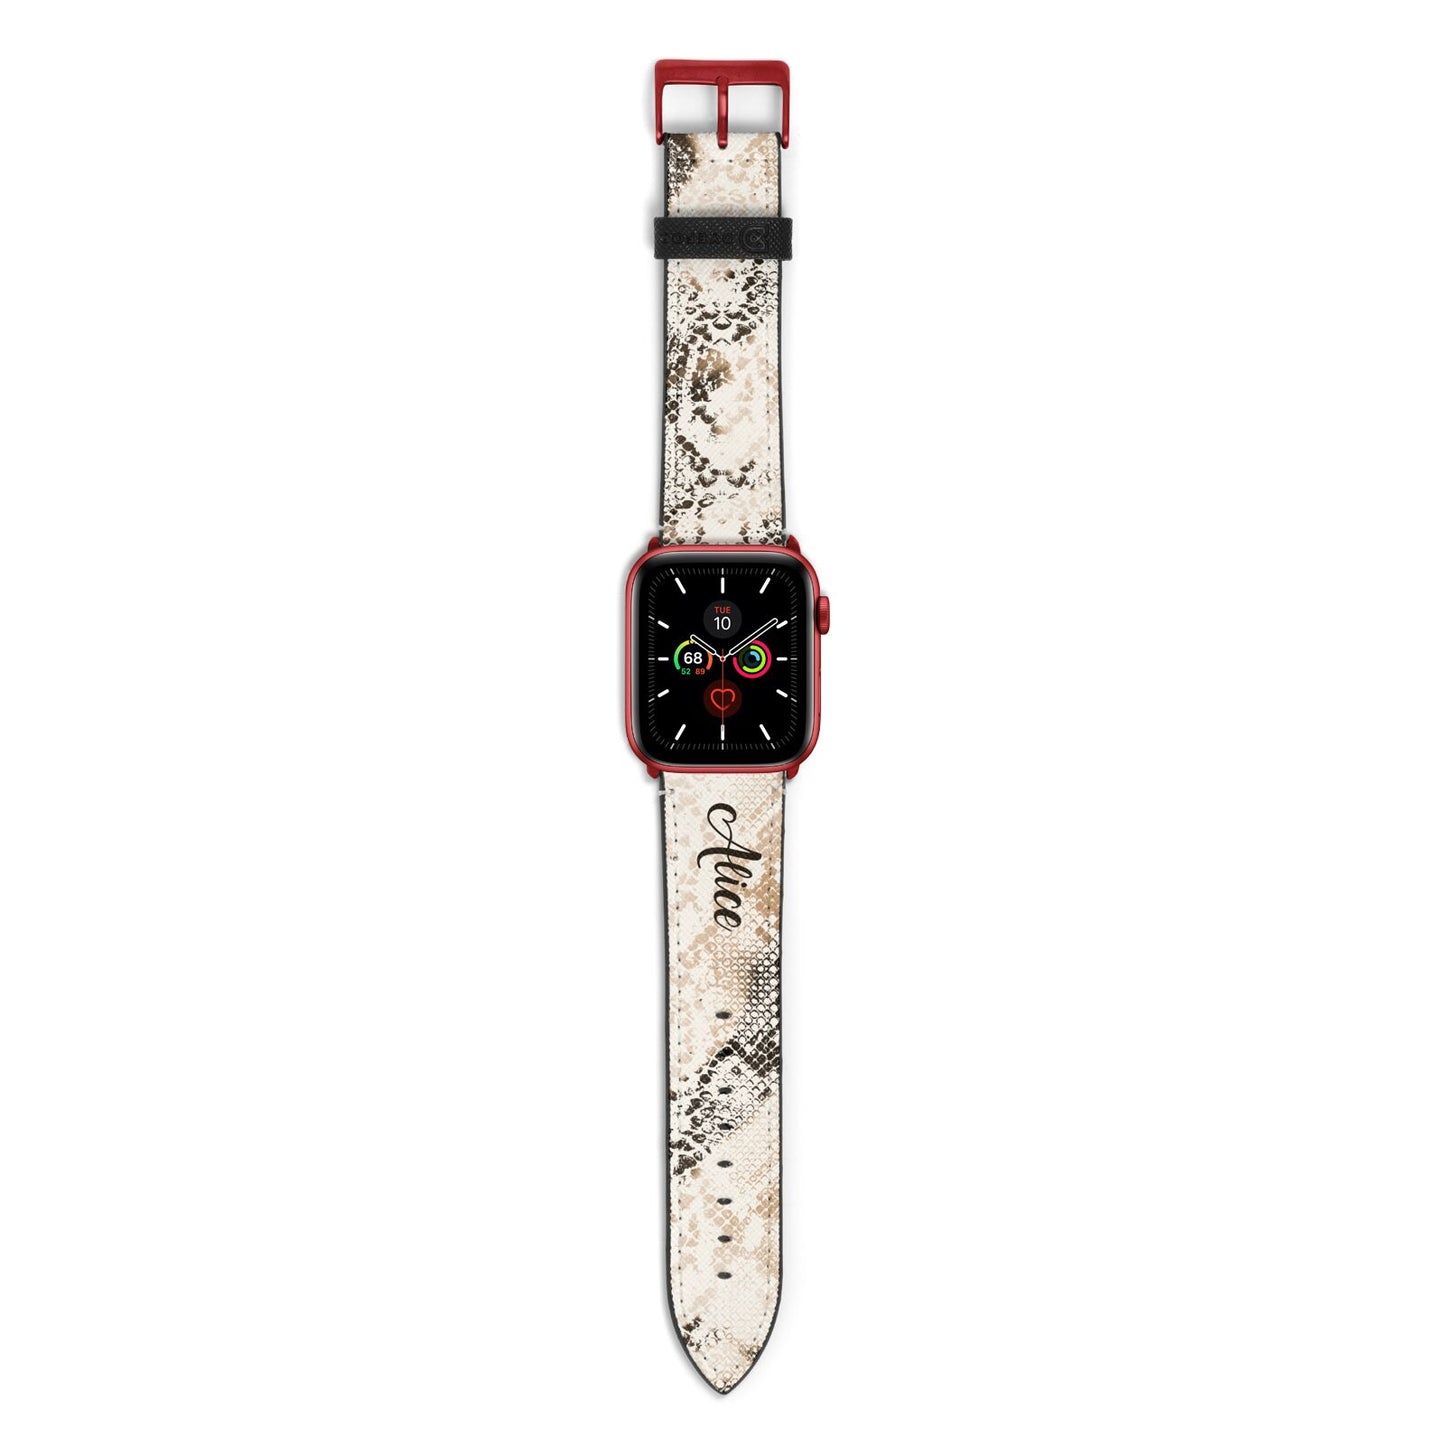 Custom Snakeskin Apple Watch Strap with Red Hardware